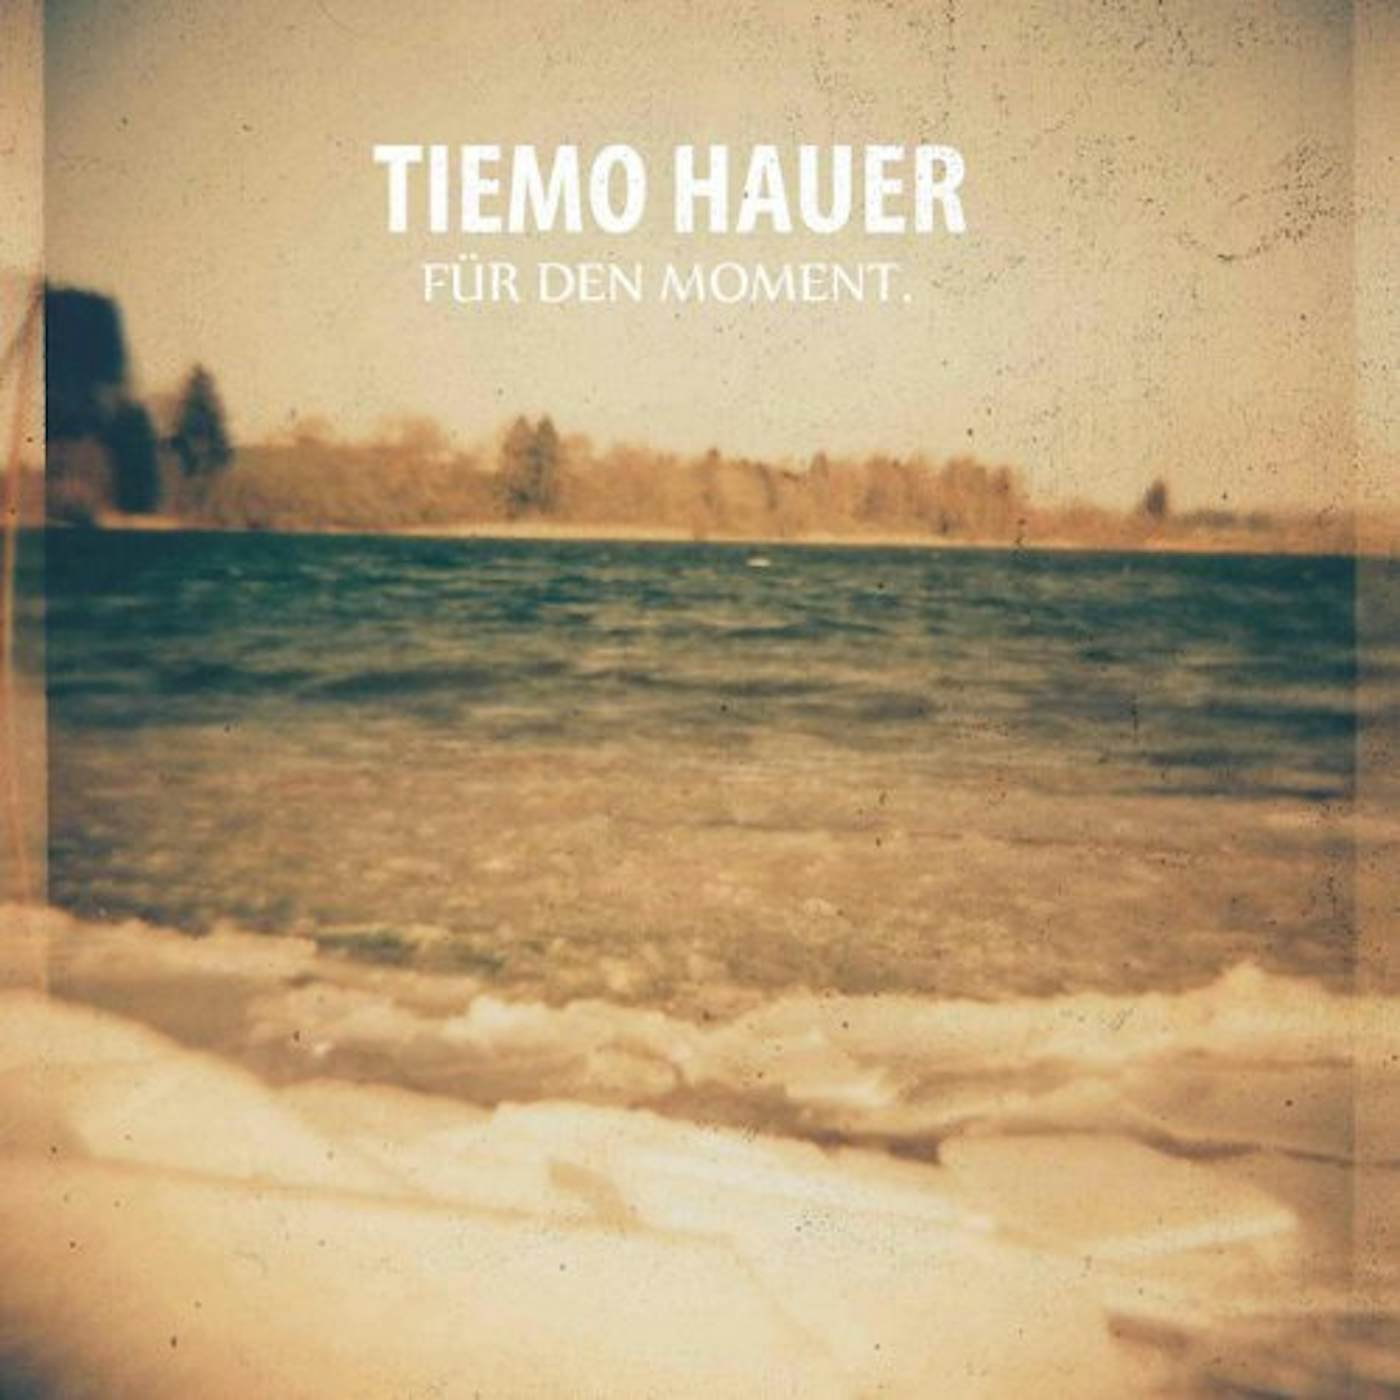 Tiemo Hauer FUER DEN MOMENT (LIMITED EDITION SIGNED GATEFOLD S Vinyl Record